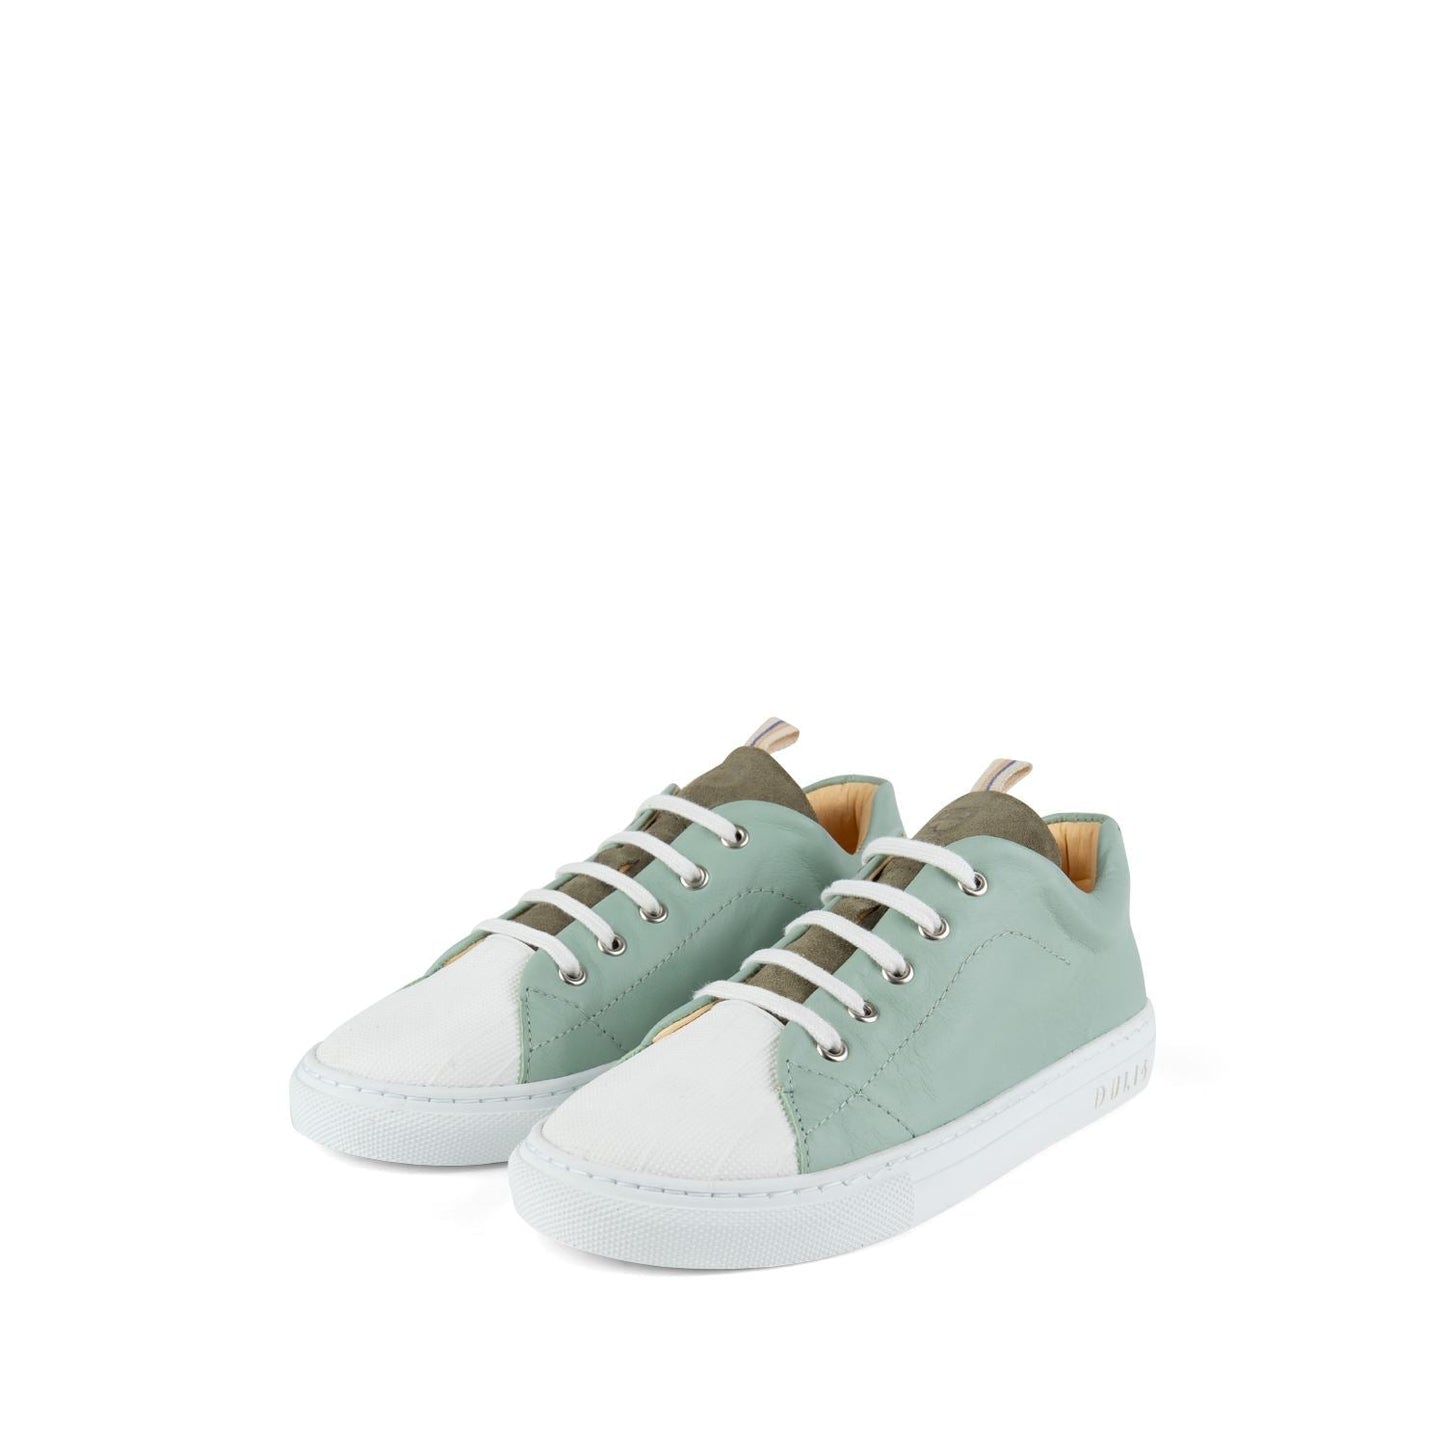 Anis Toe Sneakers Shoes Dulis Shoes 